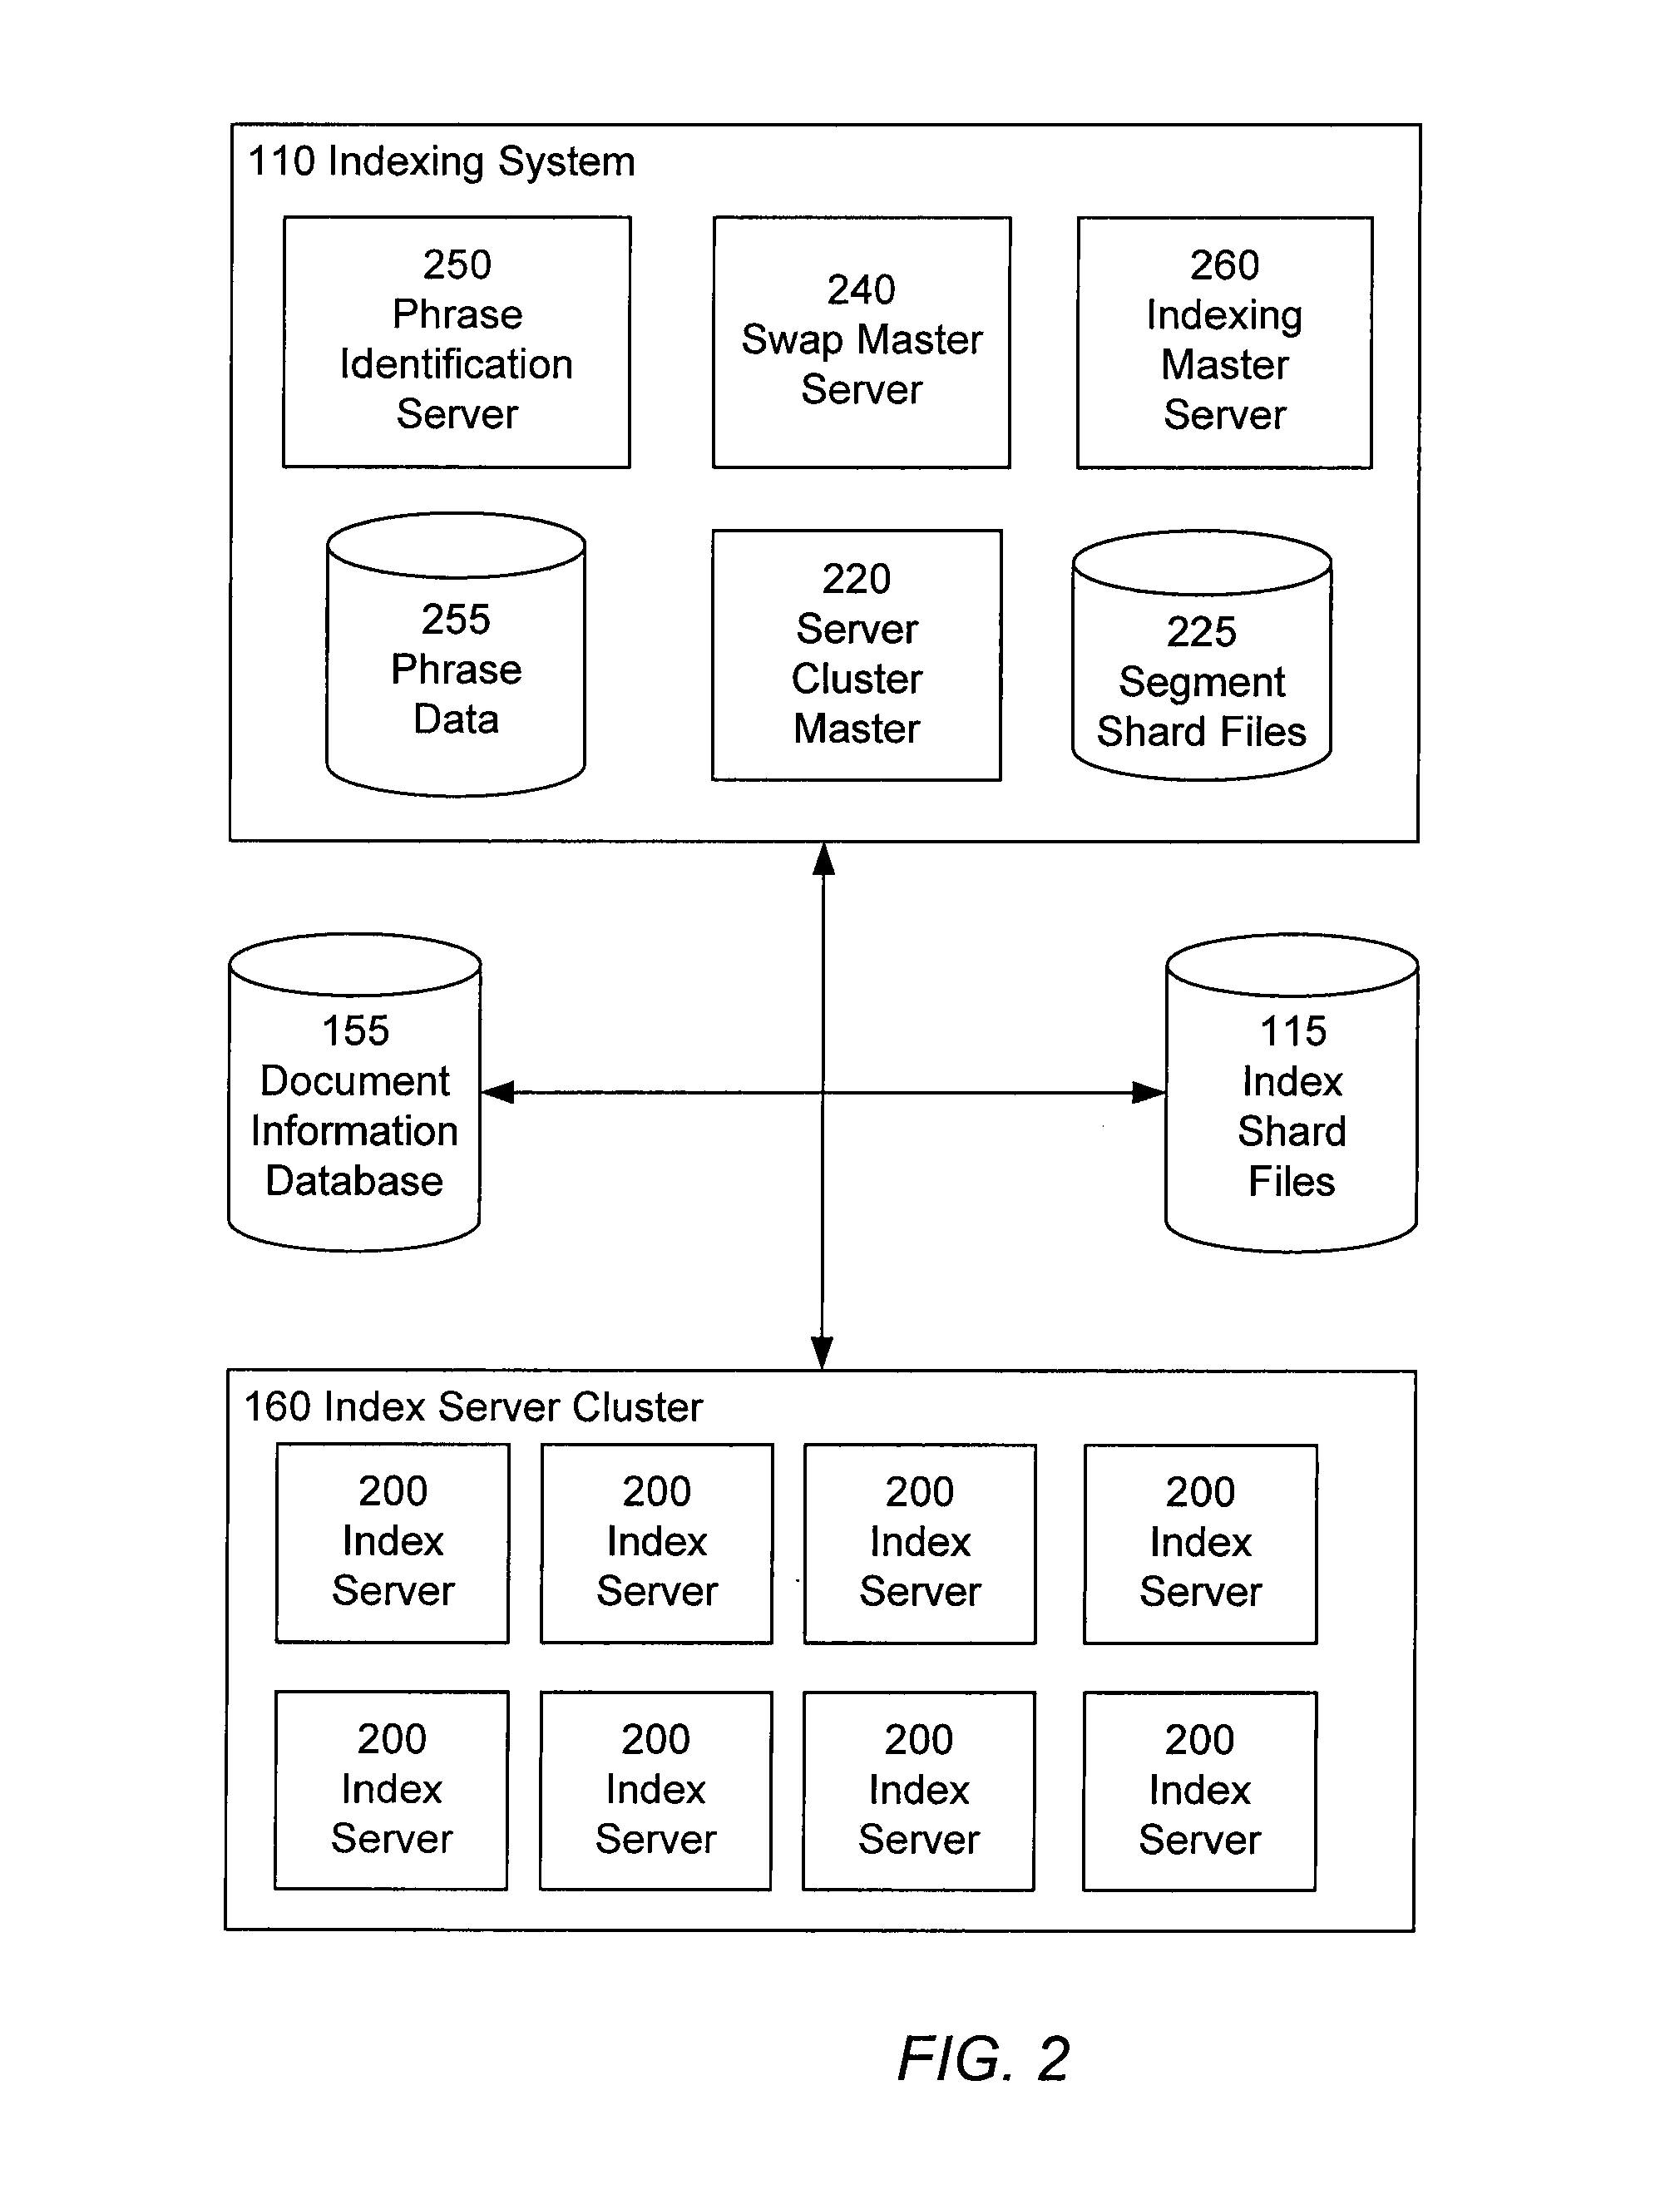 Index server architecture using tiered and sharded phrase posting lists